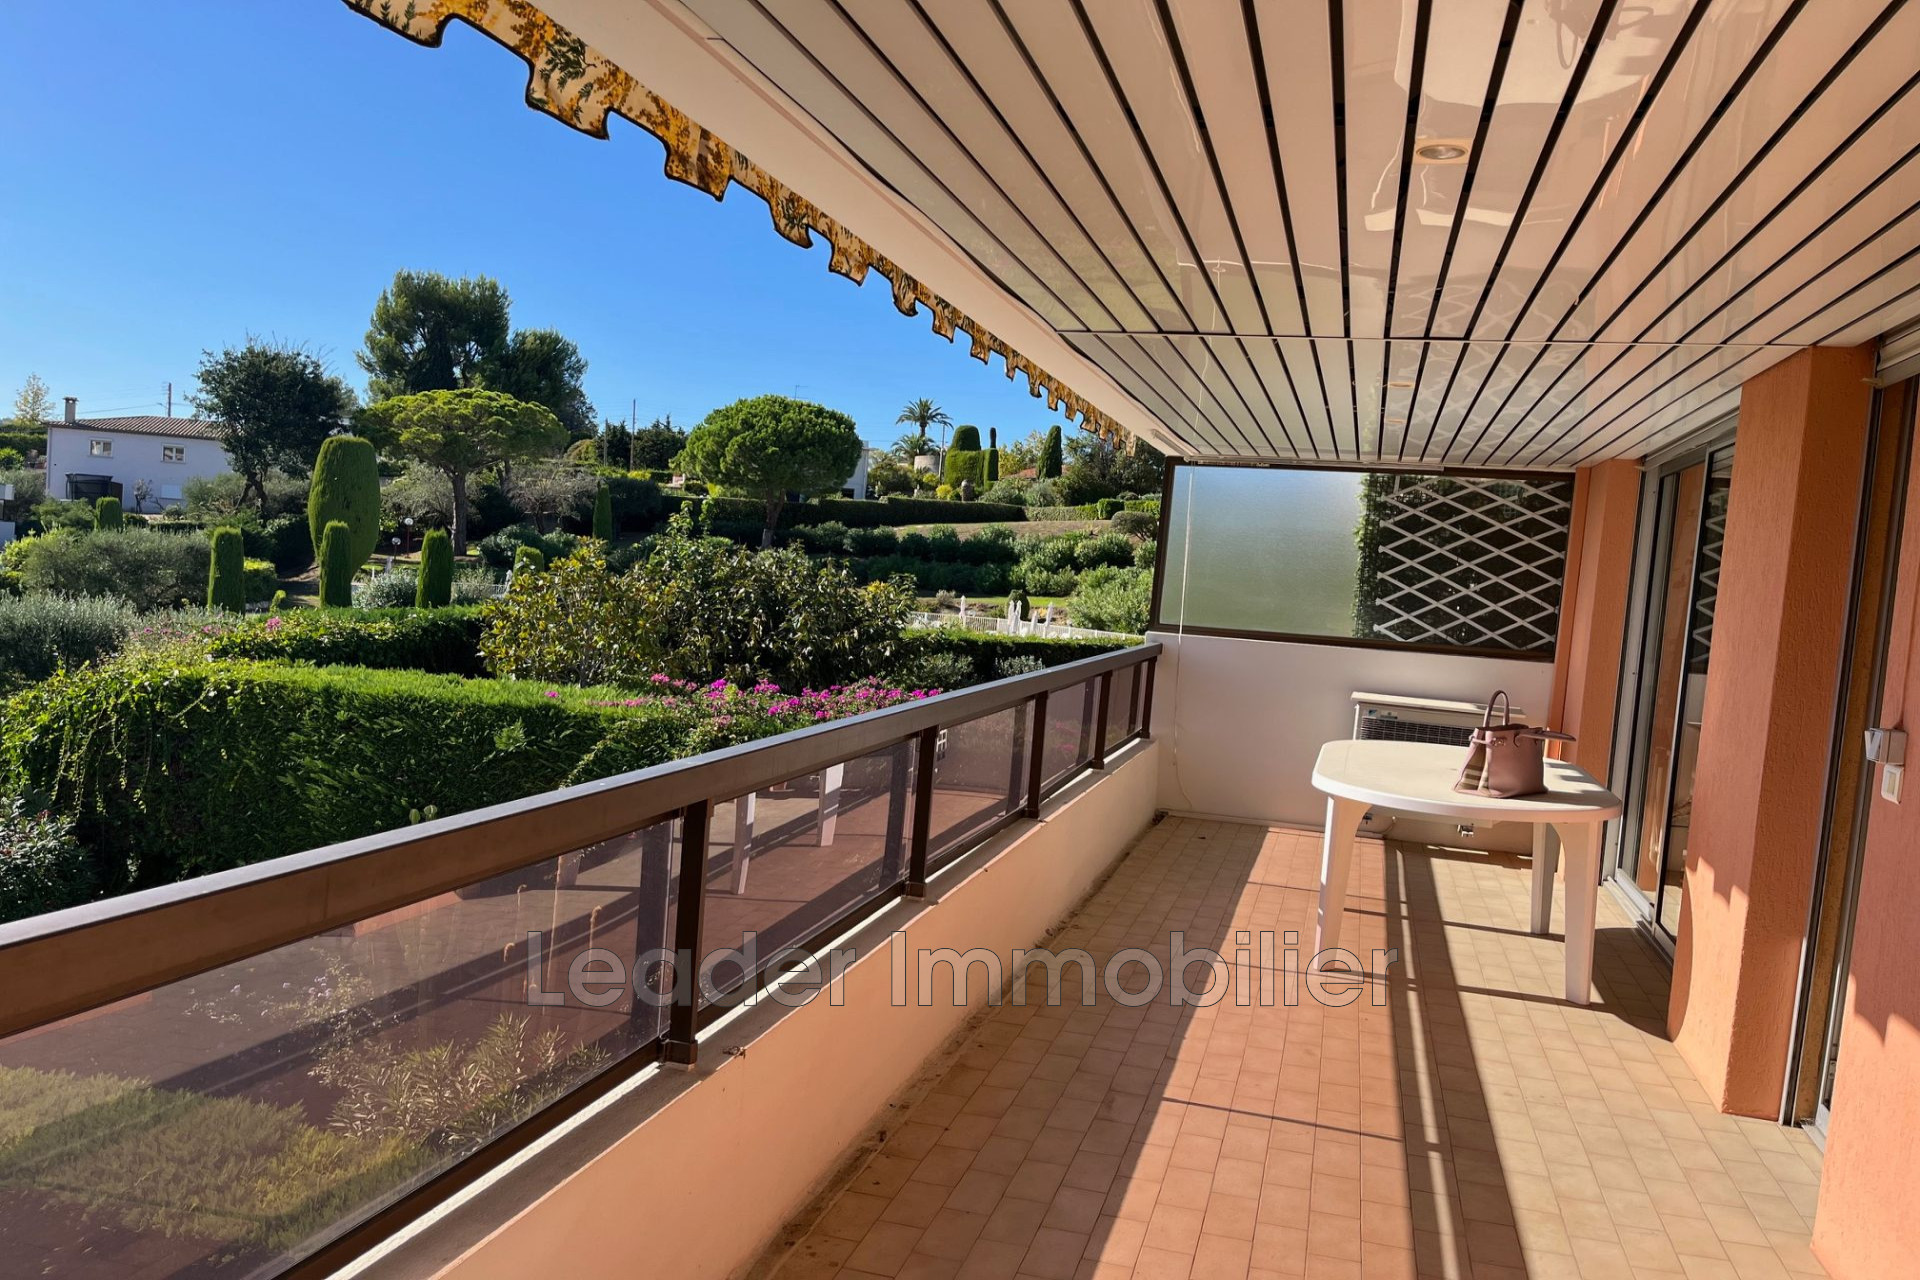 Vente Appartement 48m² à Antibes (06600) - Leader Immobilier